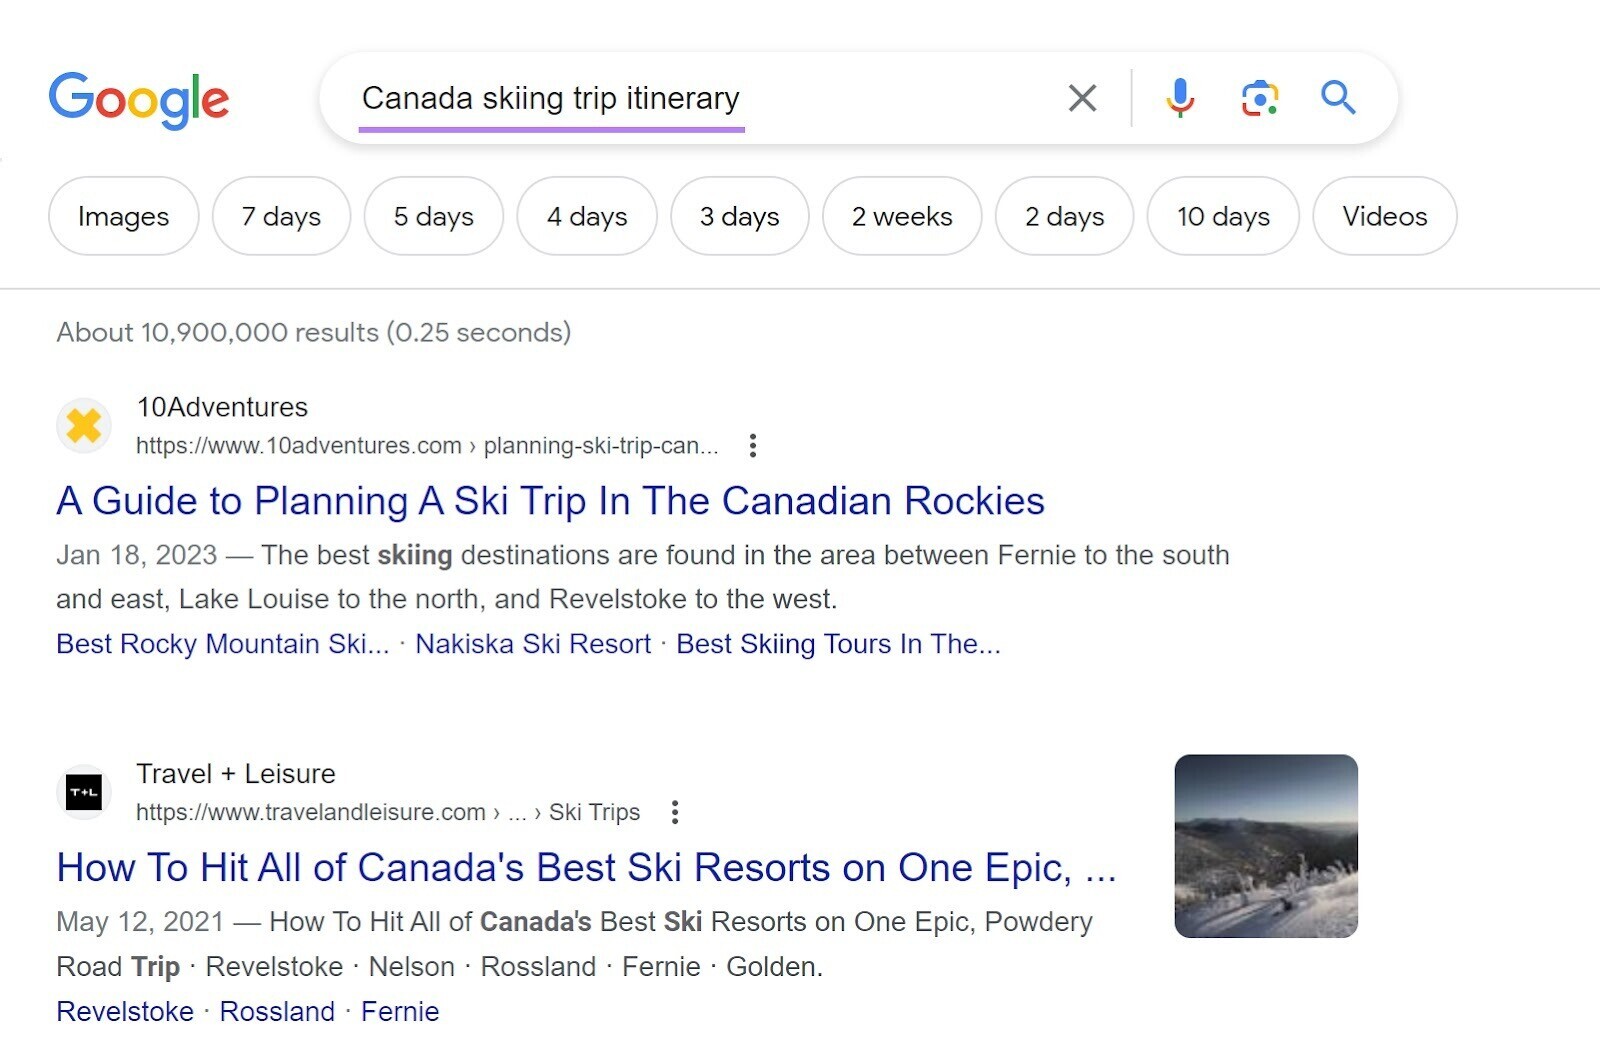 "Canada skiing trip itinerary" query in Google